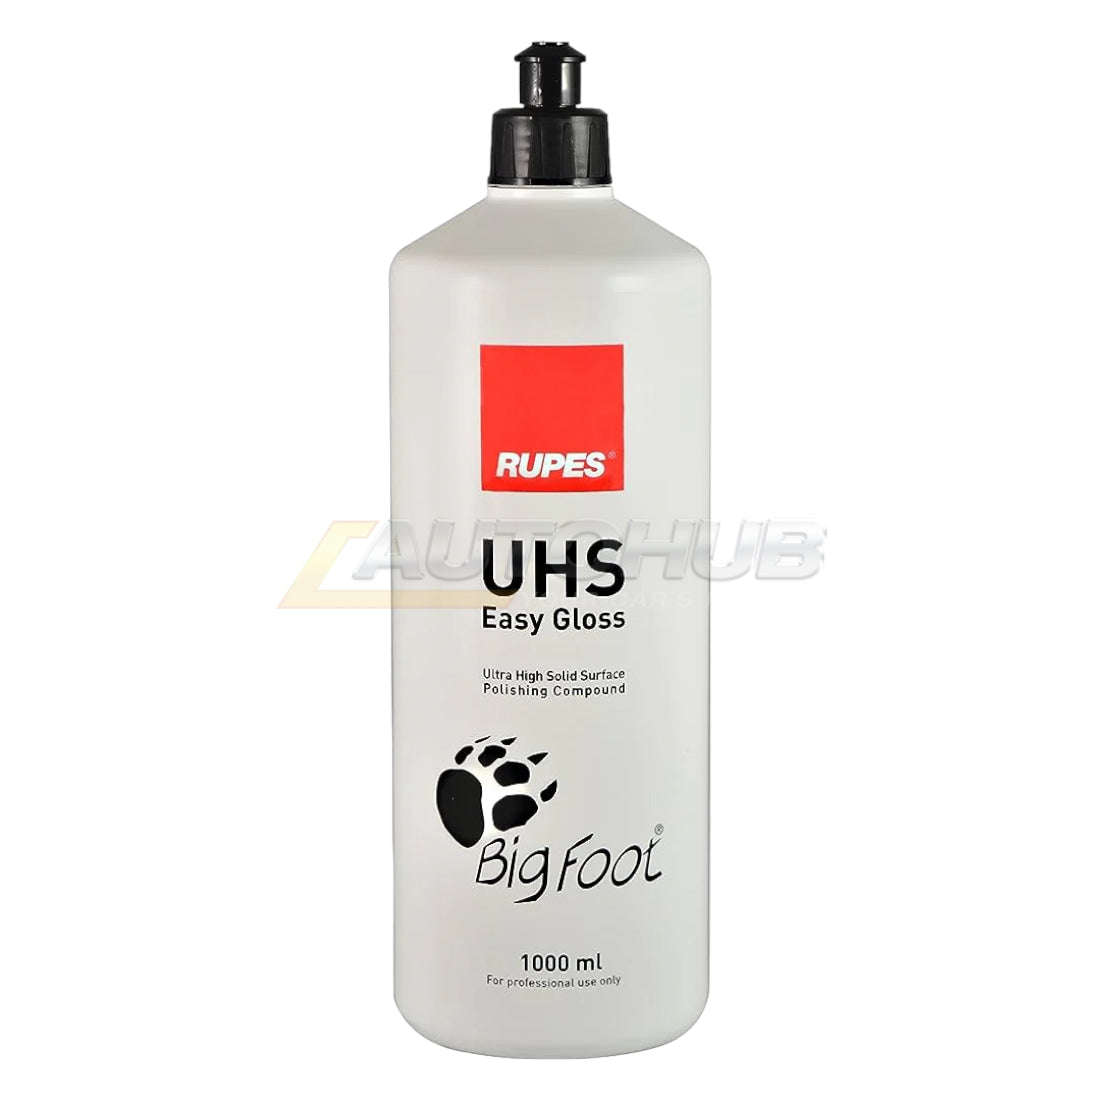 Rupes Ultra High Solid Surface Polishing Compound " Easy Gloss"